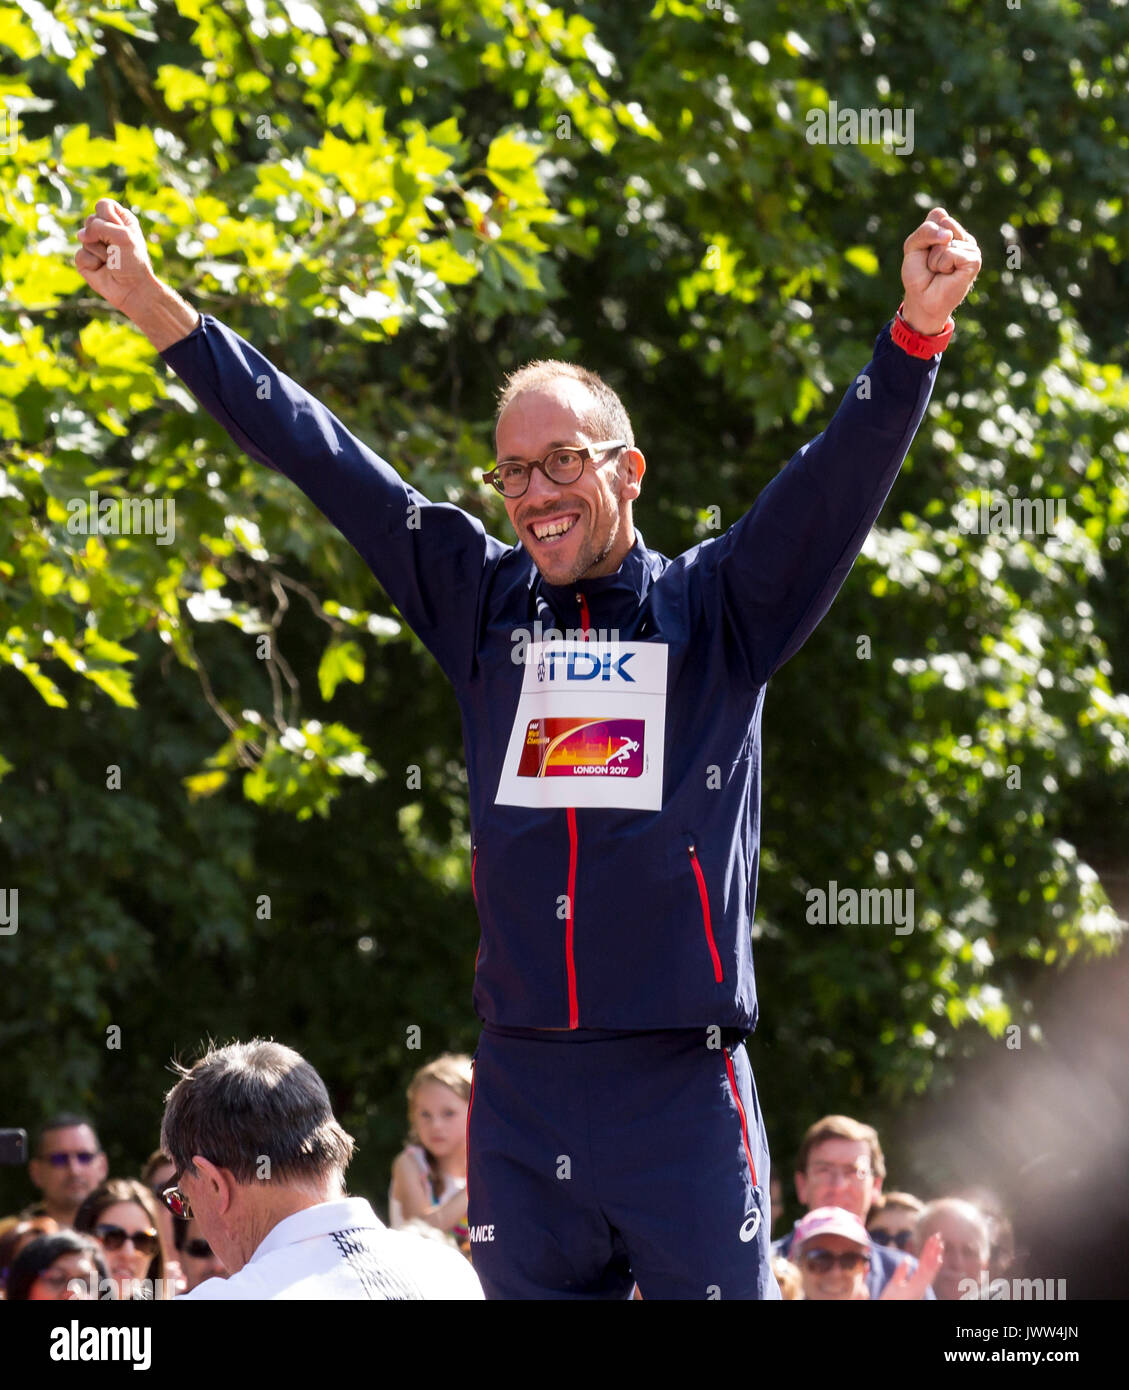 London, UK. 13th August, 2017. Yohann Diniz receives gold at decoration ceremony, Race Walk at IAAF World Championships in London, UK on August 13, 2017. The race took place on The Mall, most picturesque street of London and attracted thousands spectators. Credit: Dominika Zarzycka/Alamy Live News Stock Photo